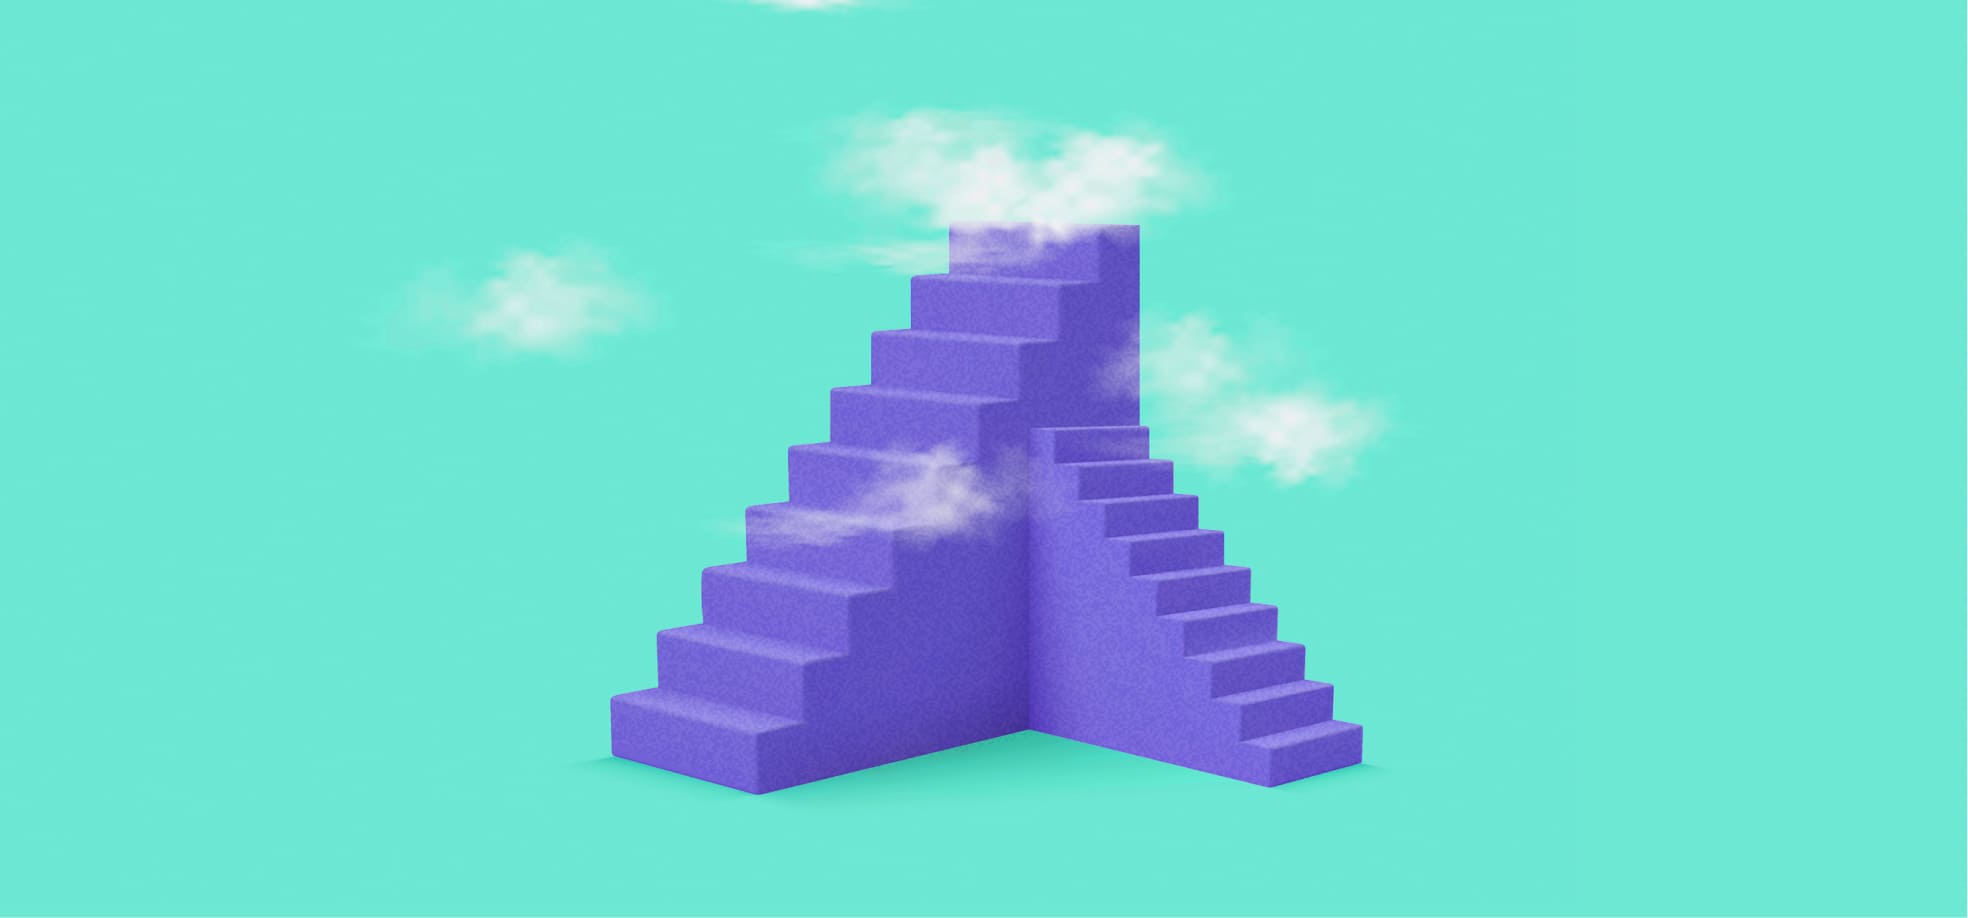 Ladder in the clouds illustration